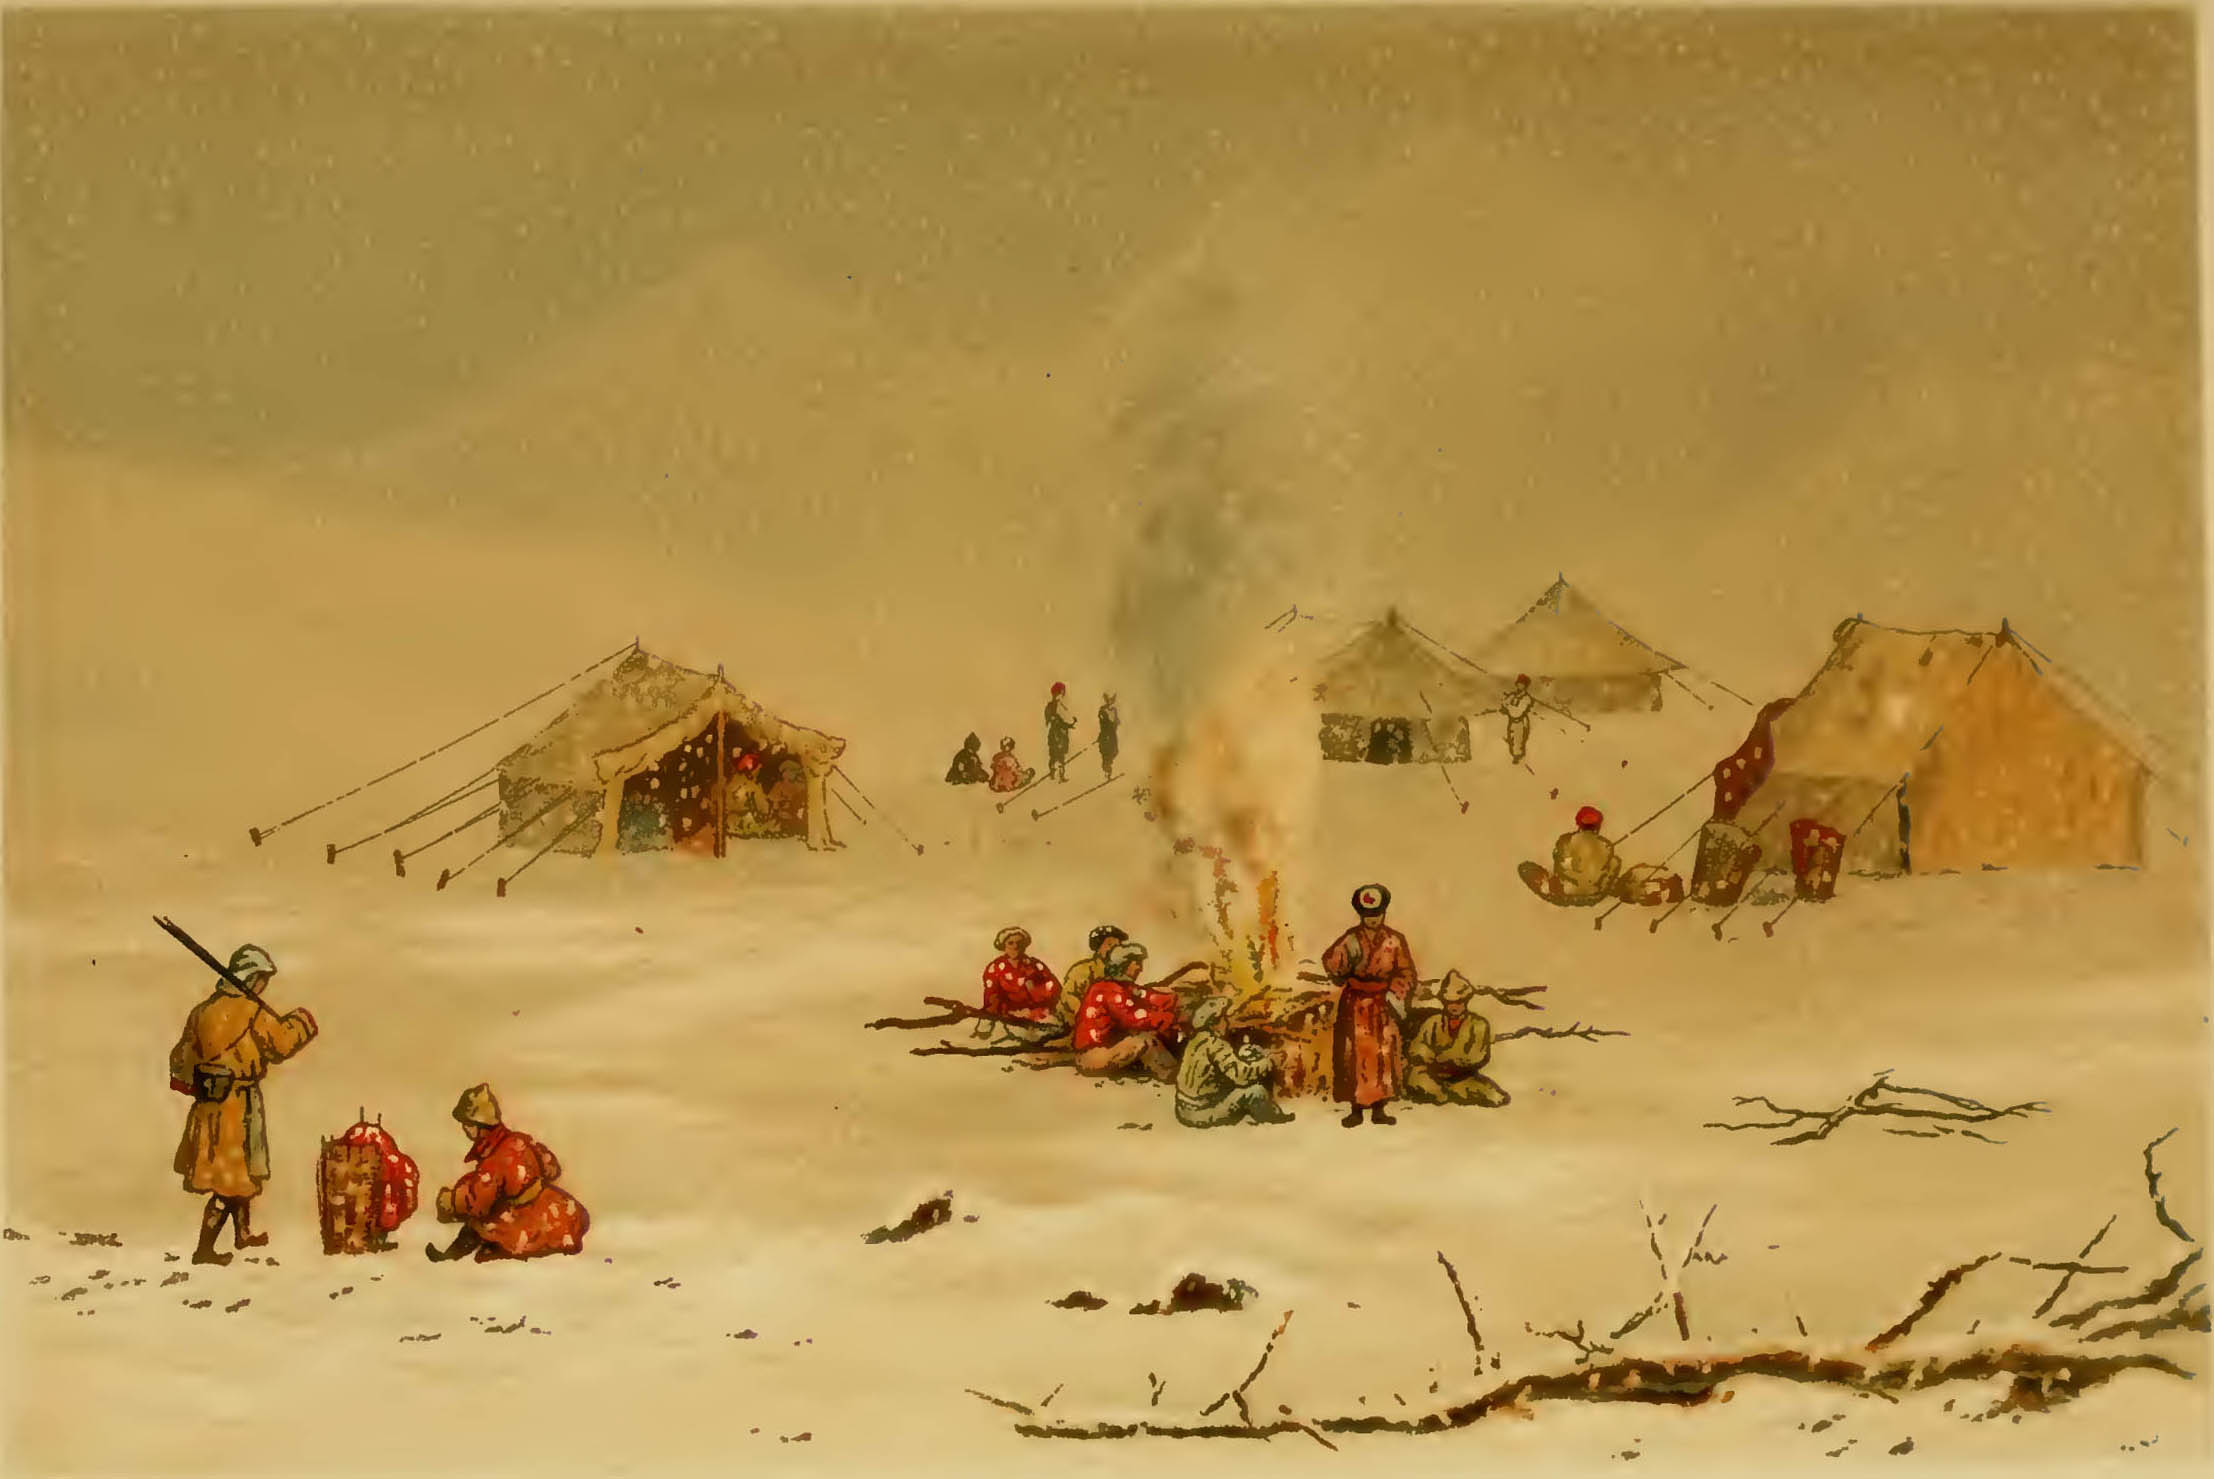 tents and groups by campfire in snowy landscape, caption: We Encamp in a Snow-Storm